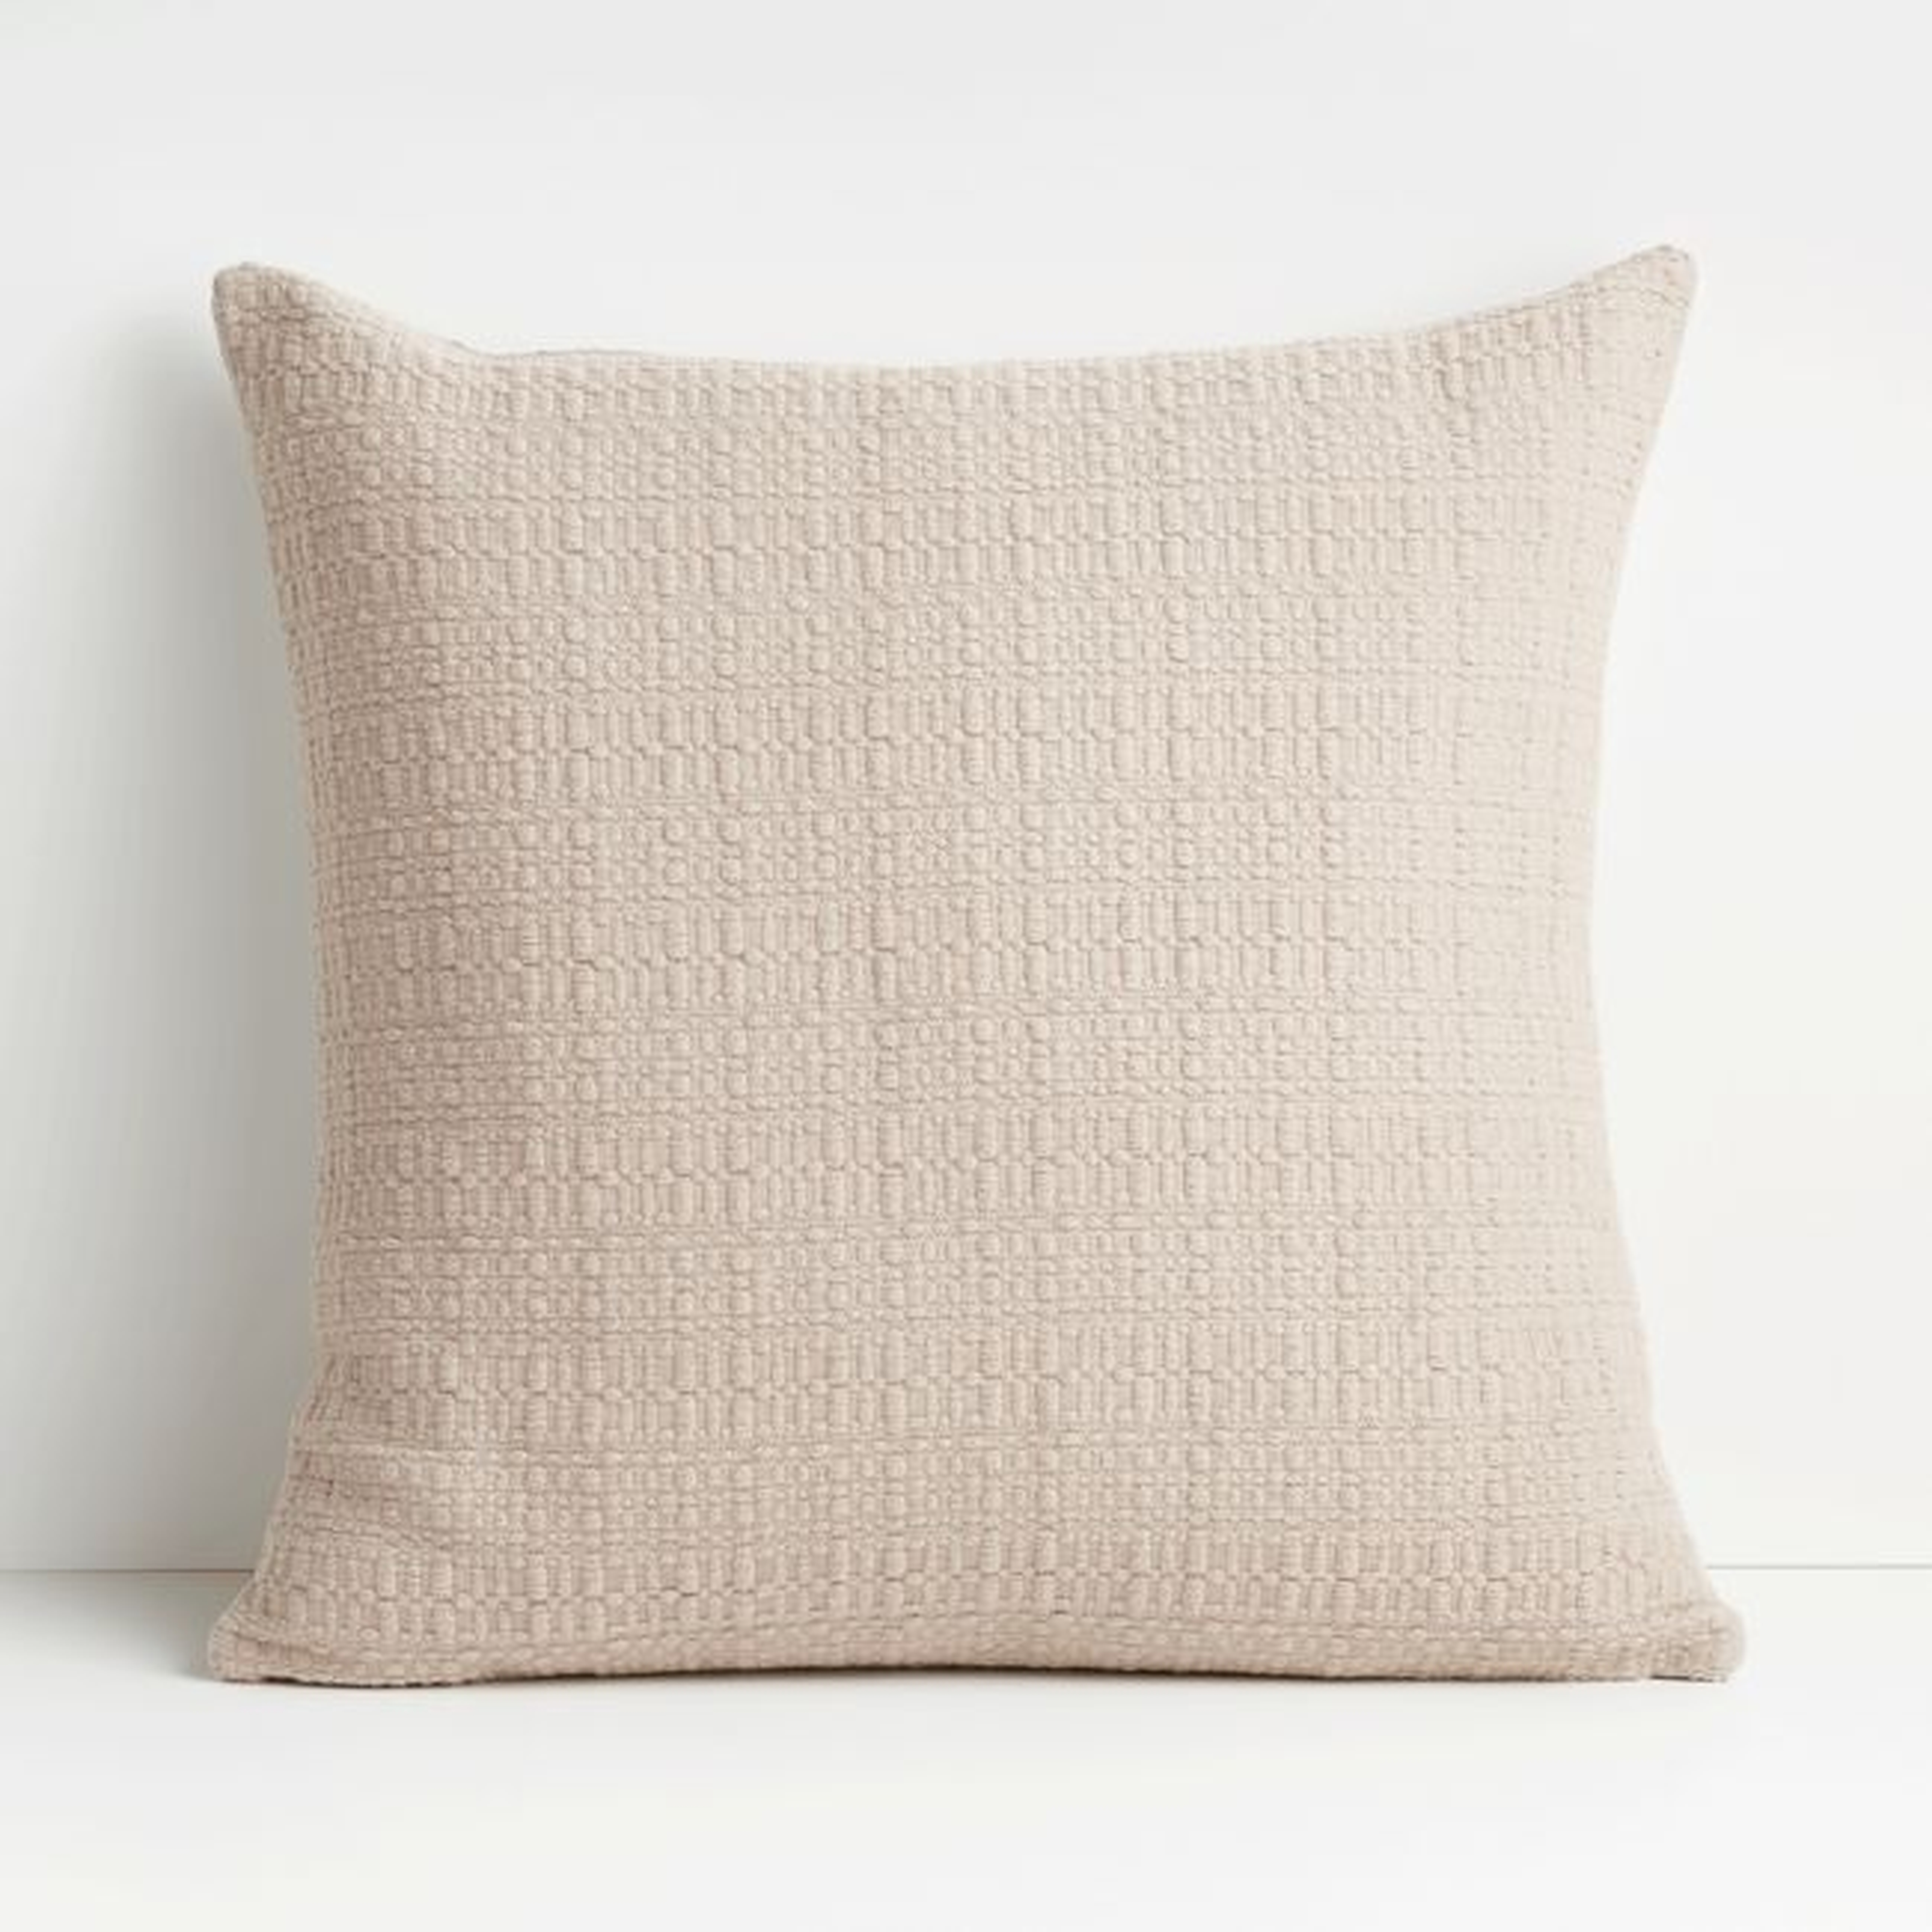 Bari 20"x20" Taupe Knitted Throw Pillow with Feather Insert - Crate and Barrel